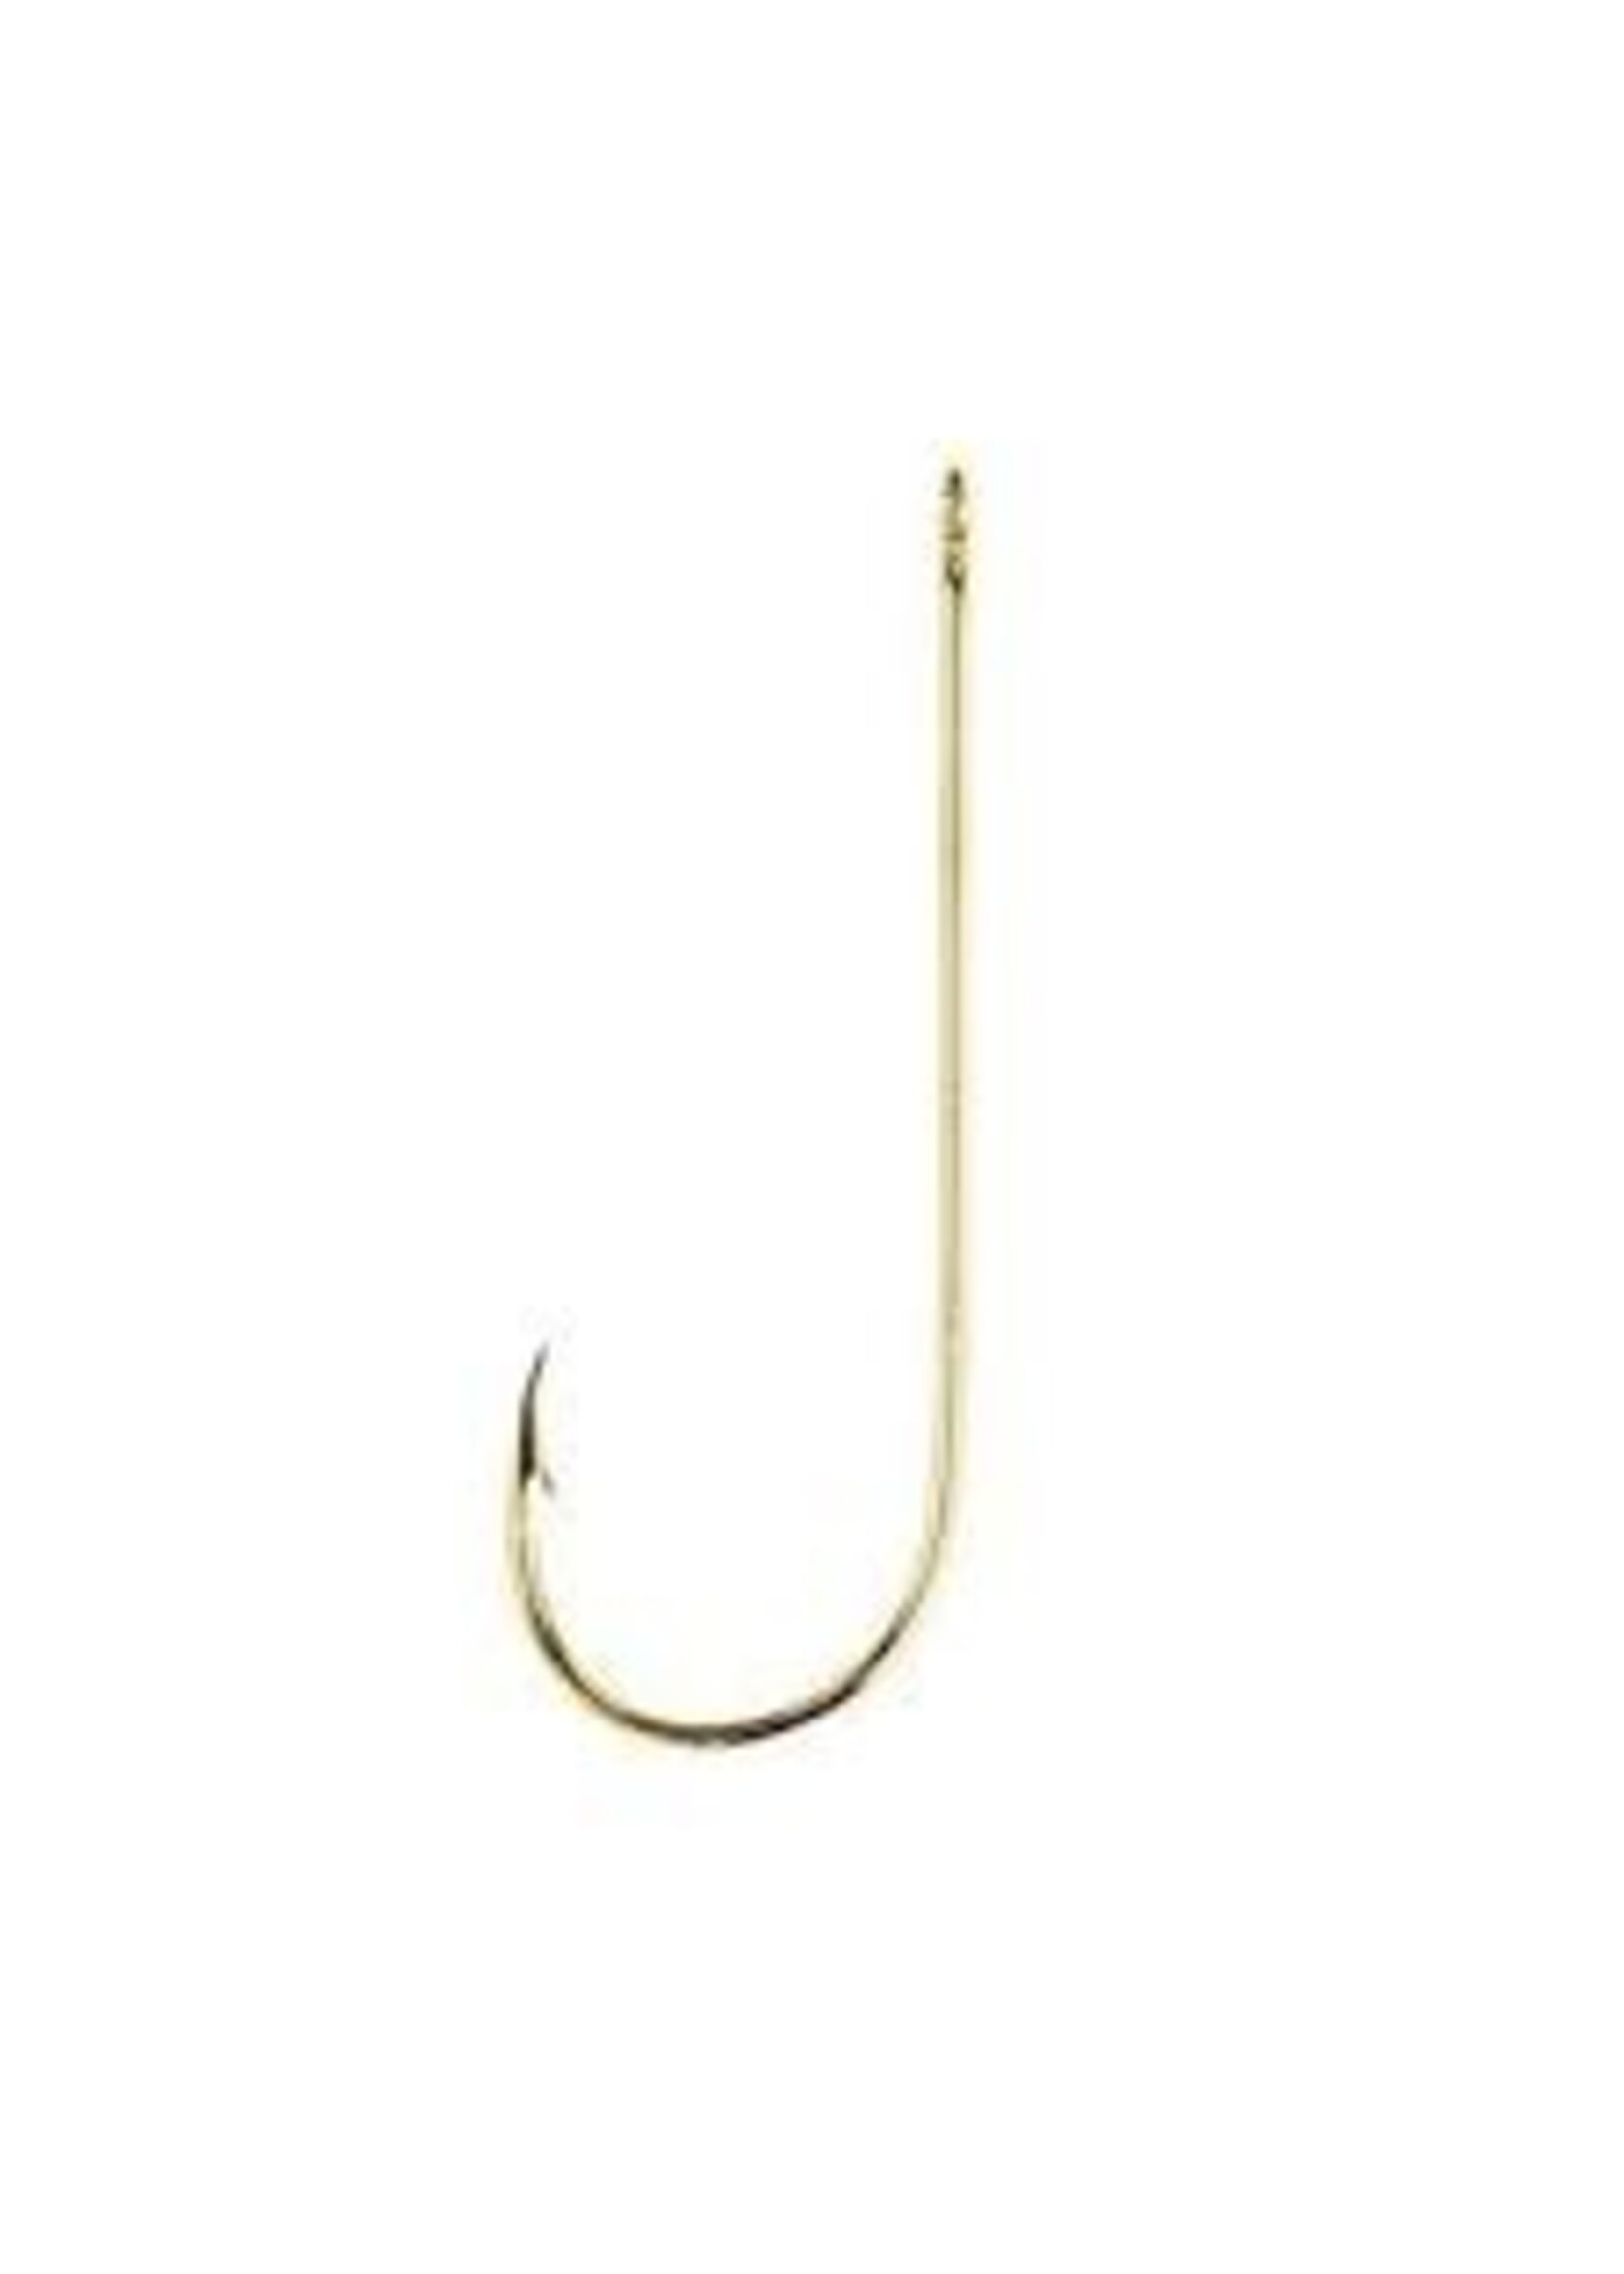 Eagle Claw Eagle Claw Aberdeen Non-Offset - 4 Gold